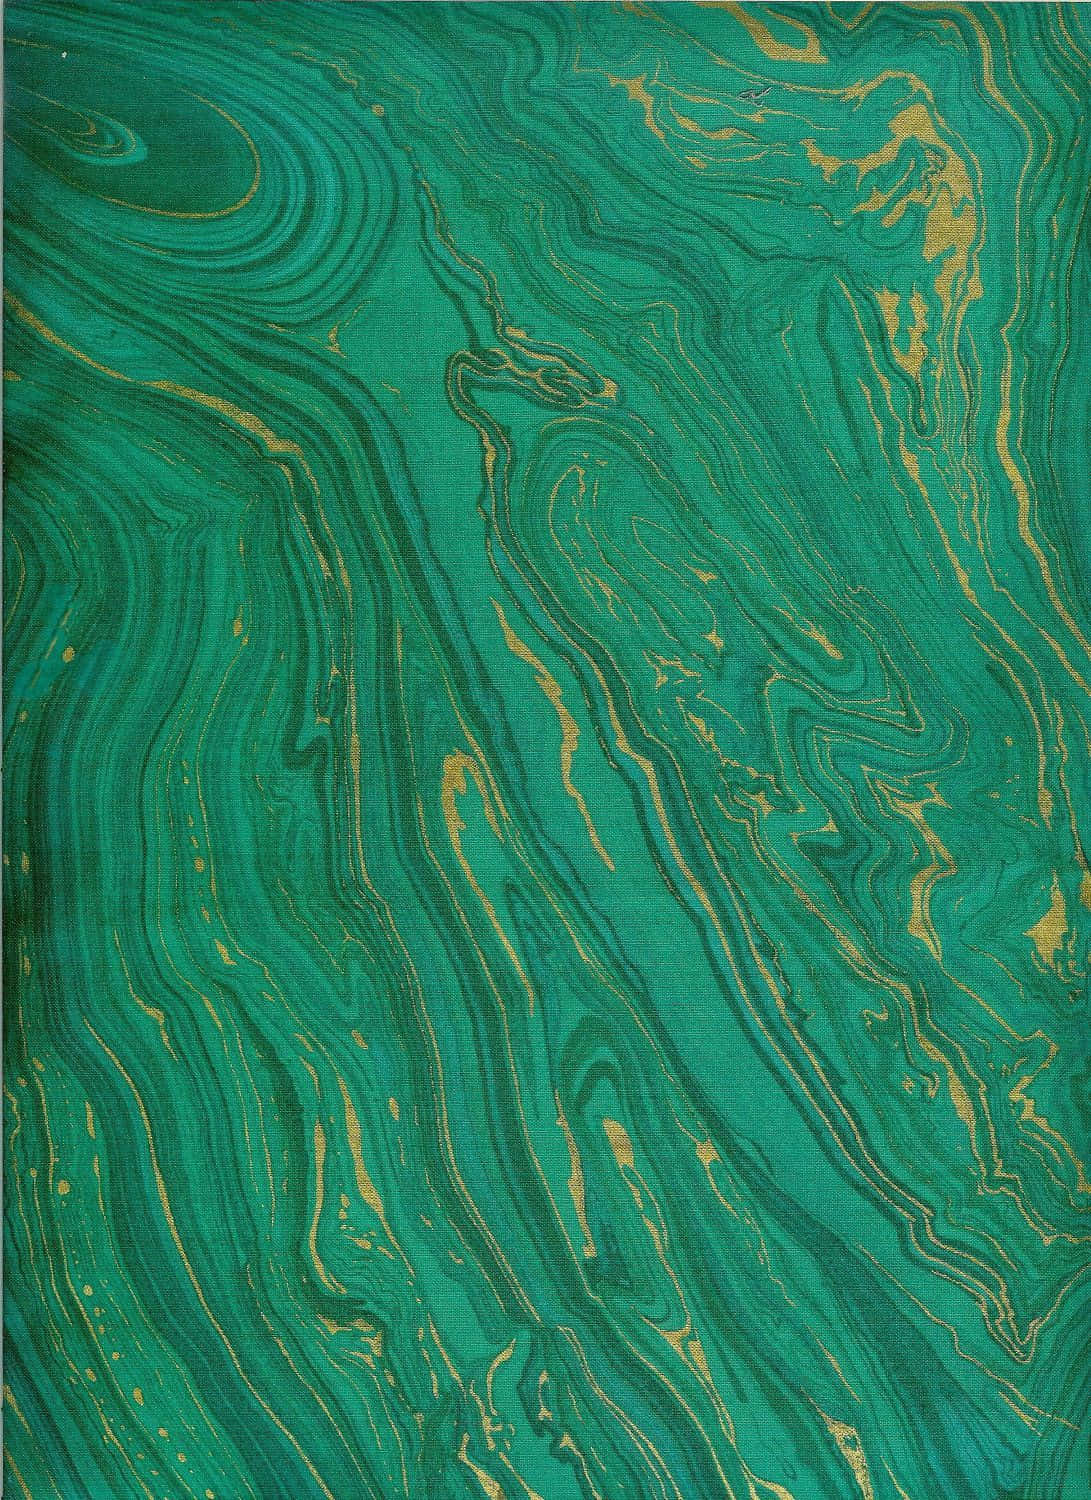 Green Marble Background Swirled With Gold